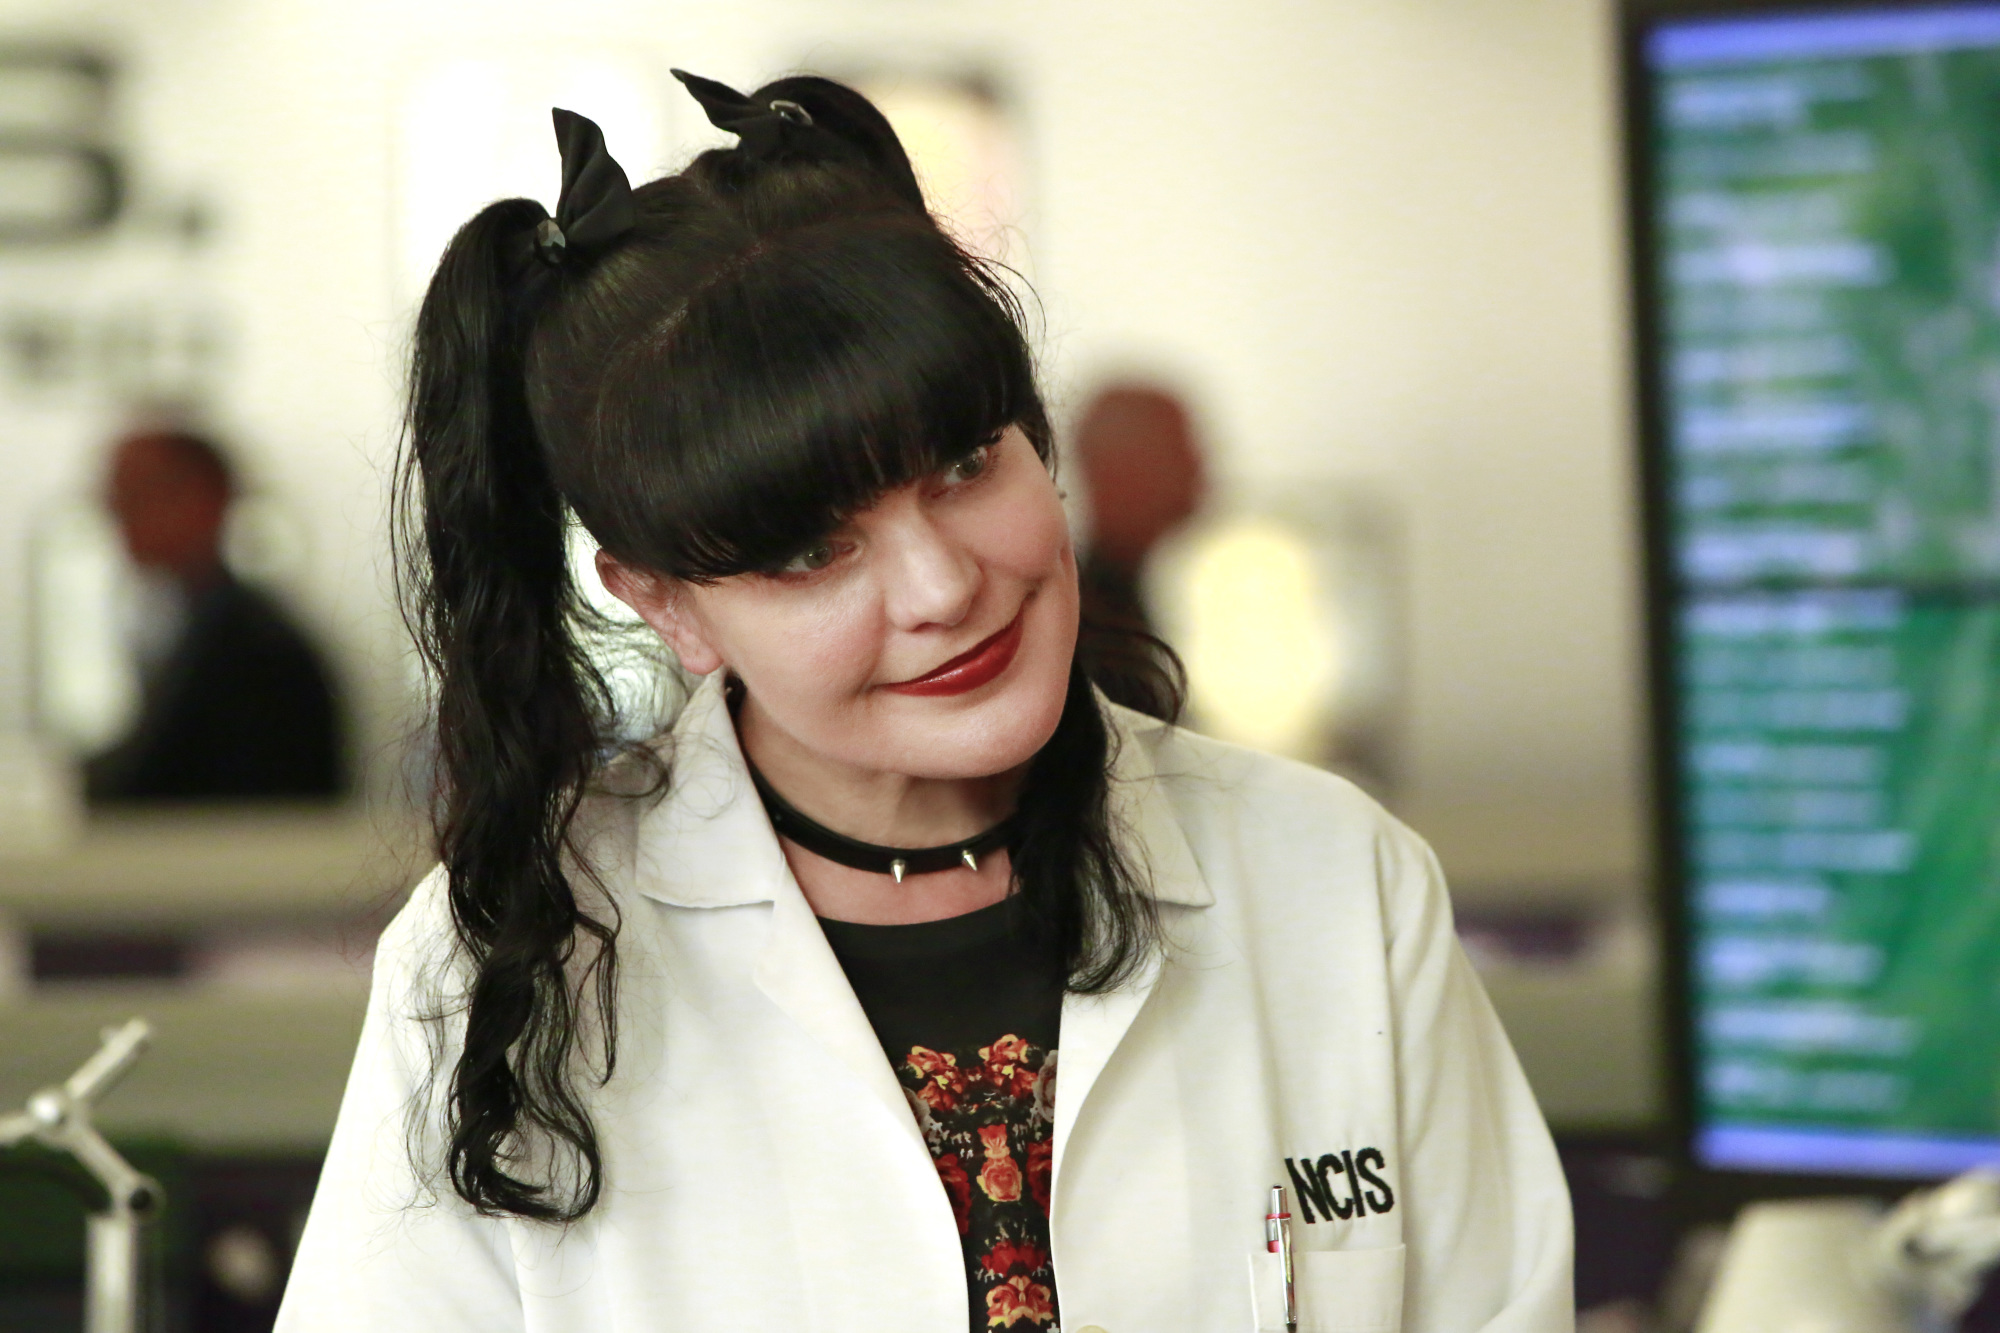 Pauley Perrette as Abby Sciuto on "NCIS" in Los Angeles, California, on September 18, 2016 | Source: Getty Images